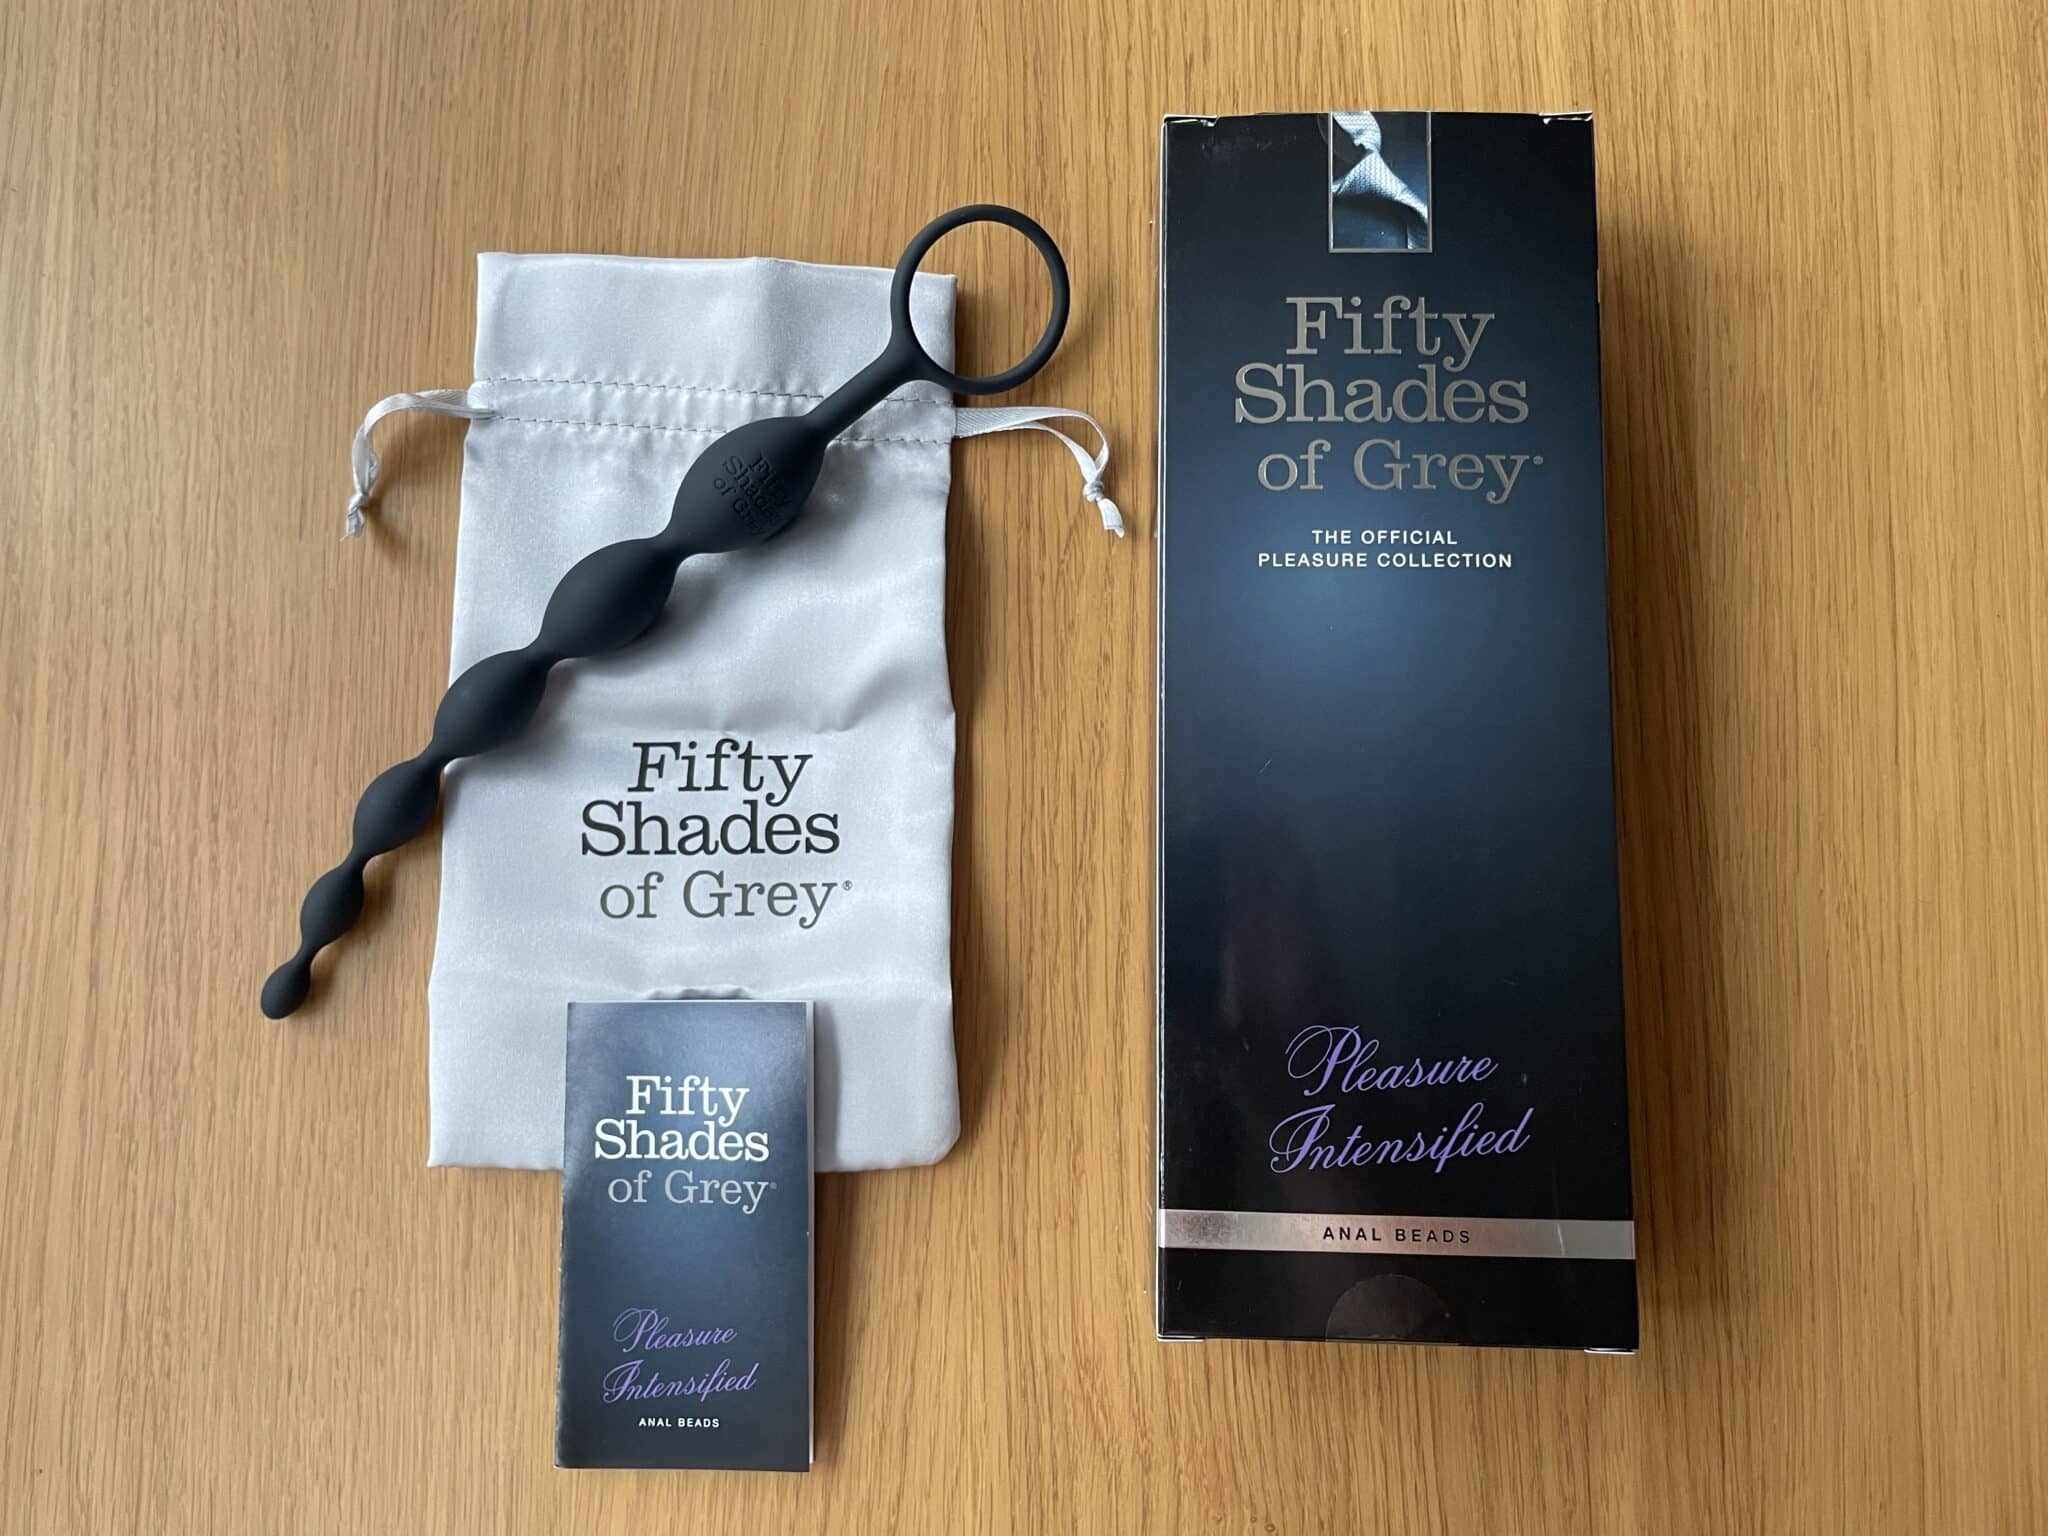 Fifty Shades of Grey Pleasure Intensified Anal Beads The Fifty Shades of Grey Pleasure Intensified Anal Beads’s Packaging: Hit or Miss?